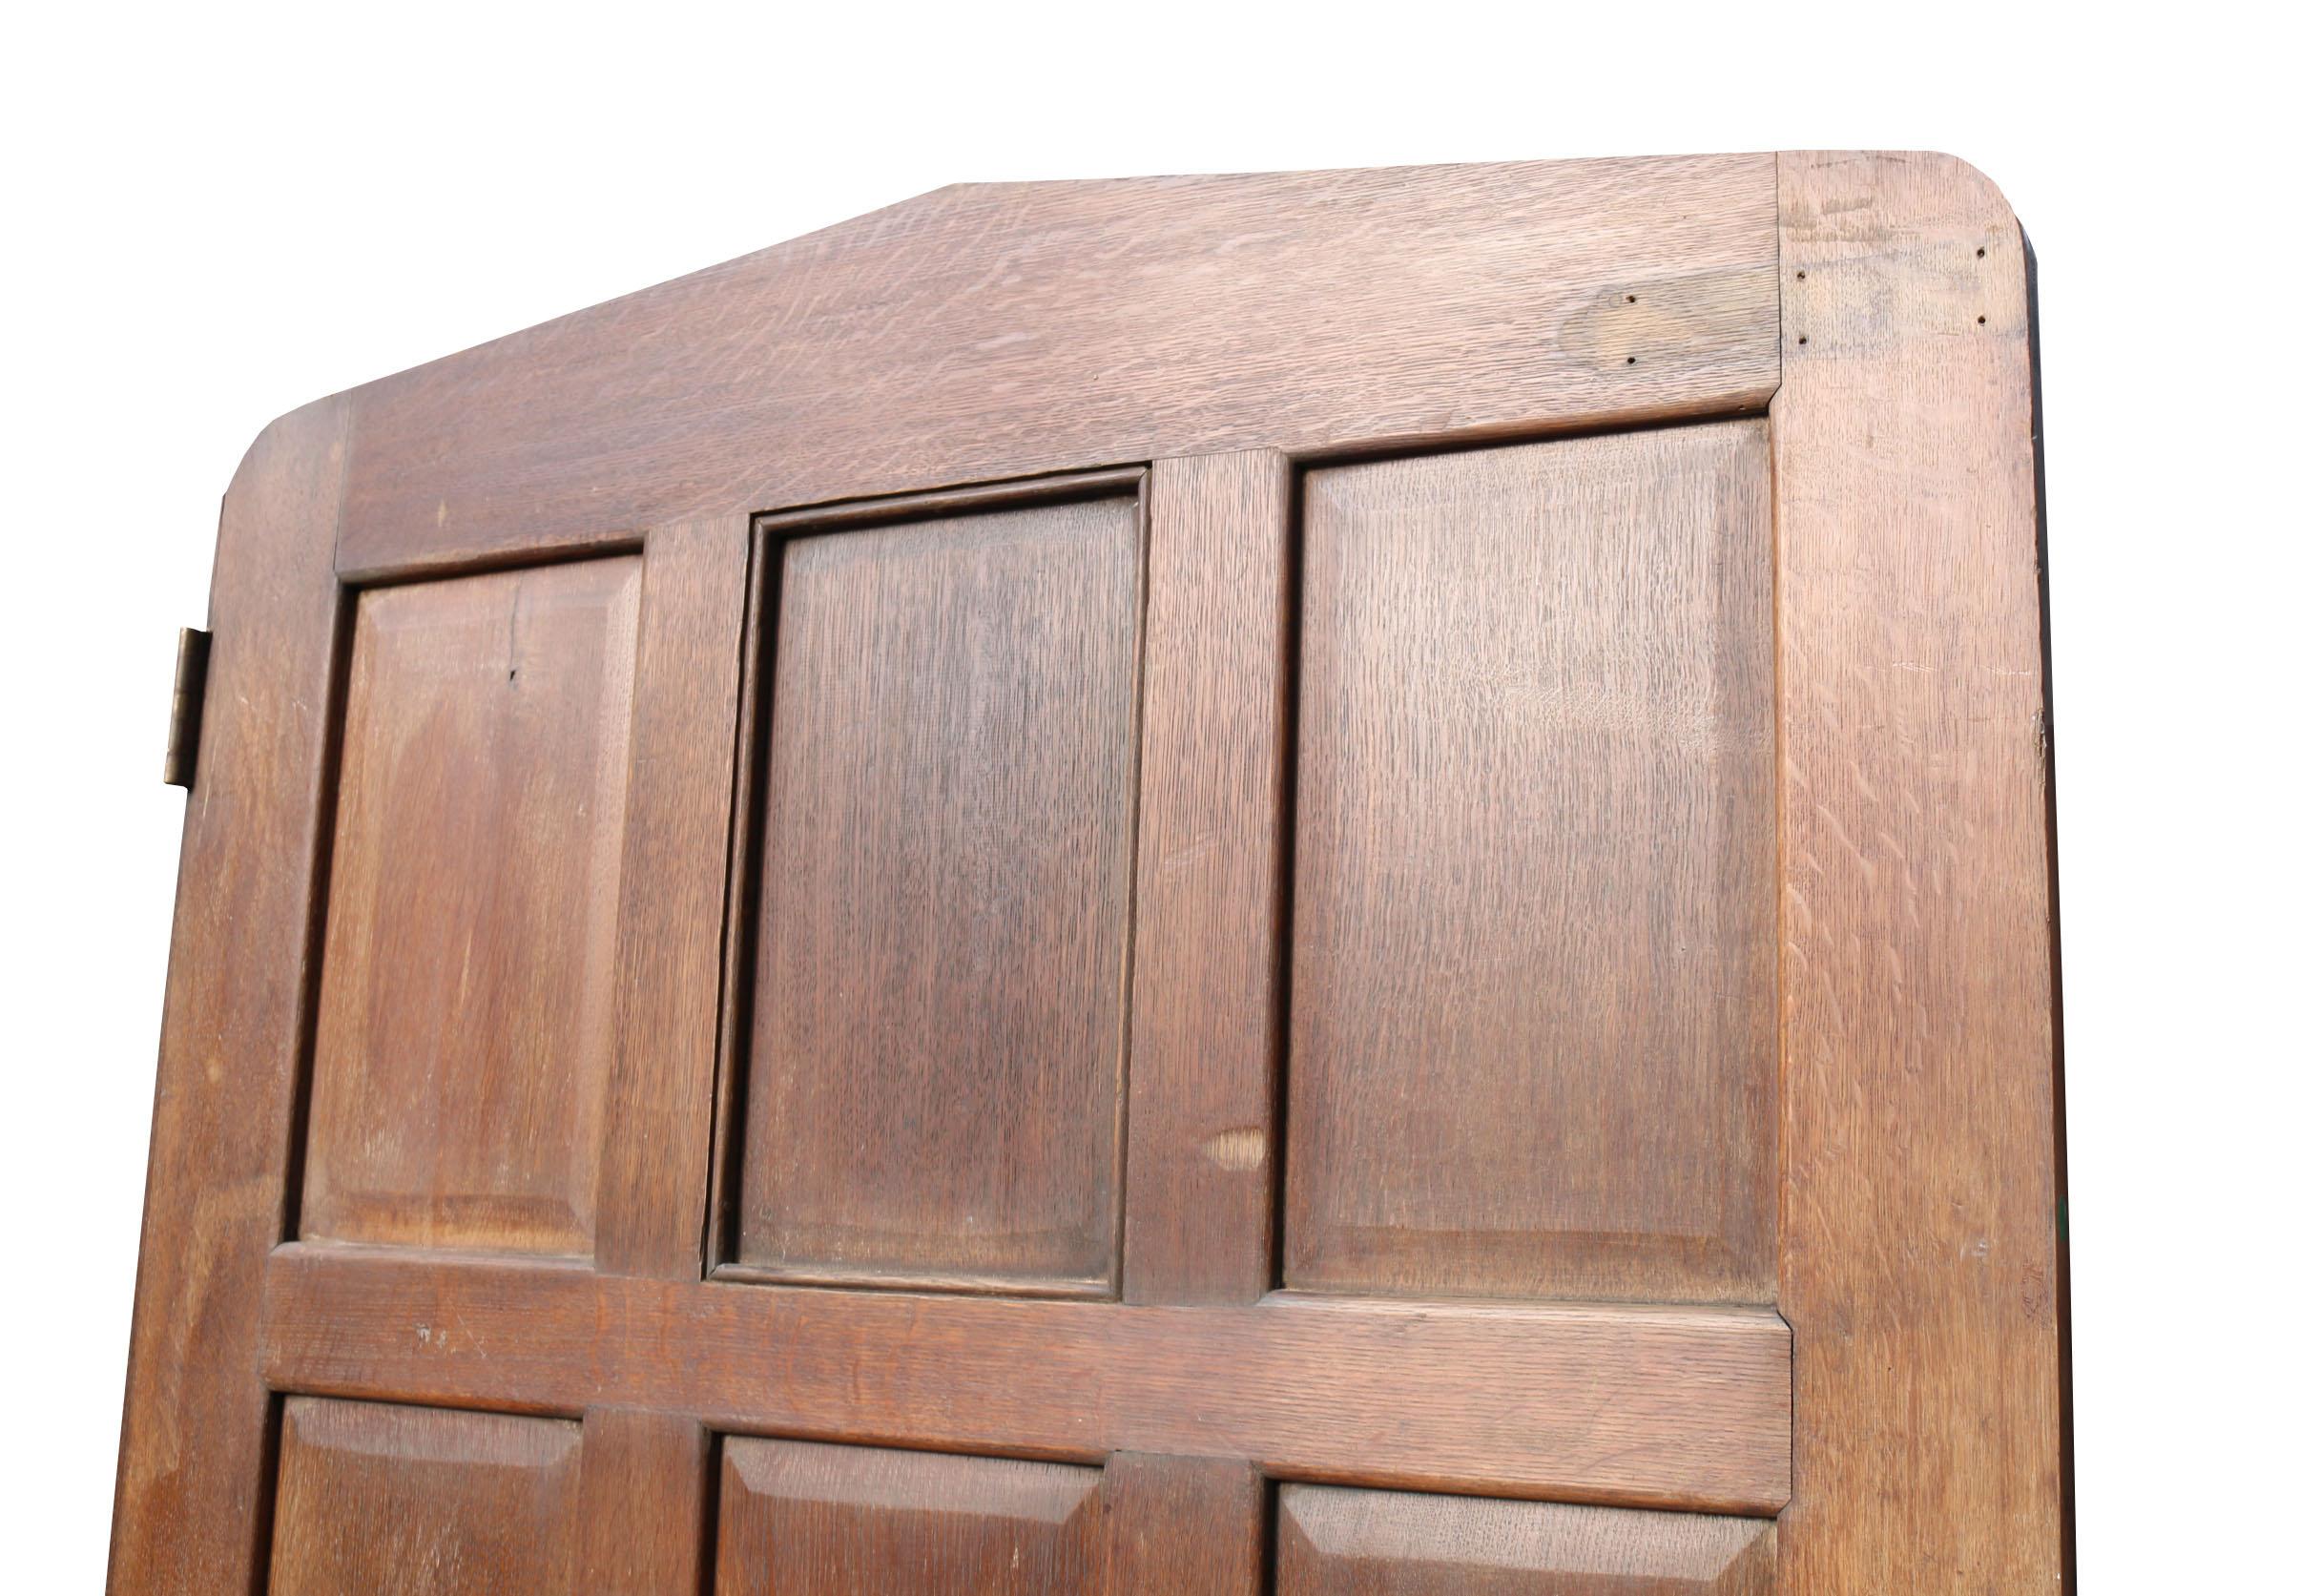 This exterior front door is in good condition for its age with only small scuffs and normal wear. 

Measures: Height 195.5 cm

Width 115 cm

Depth 4.3 cm

Weight 48 kg.
 